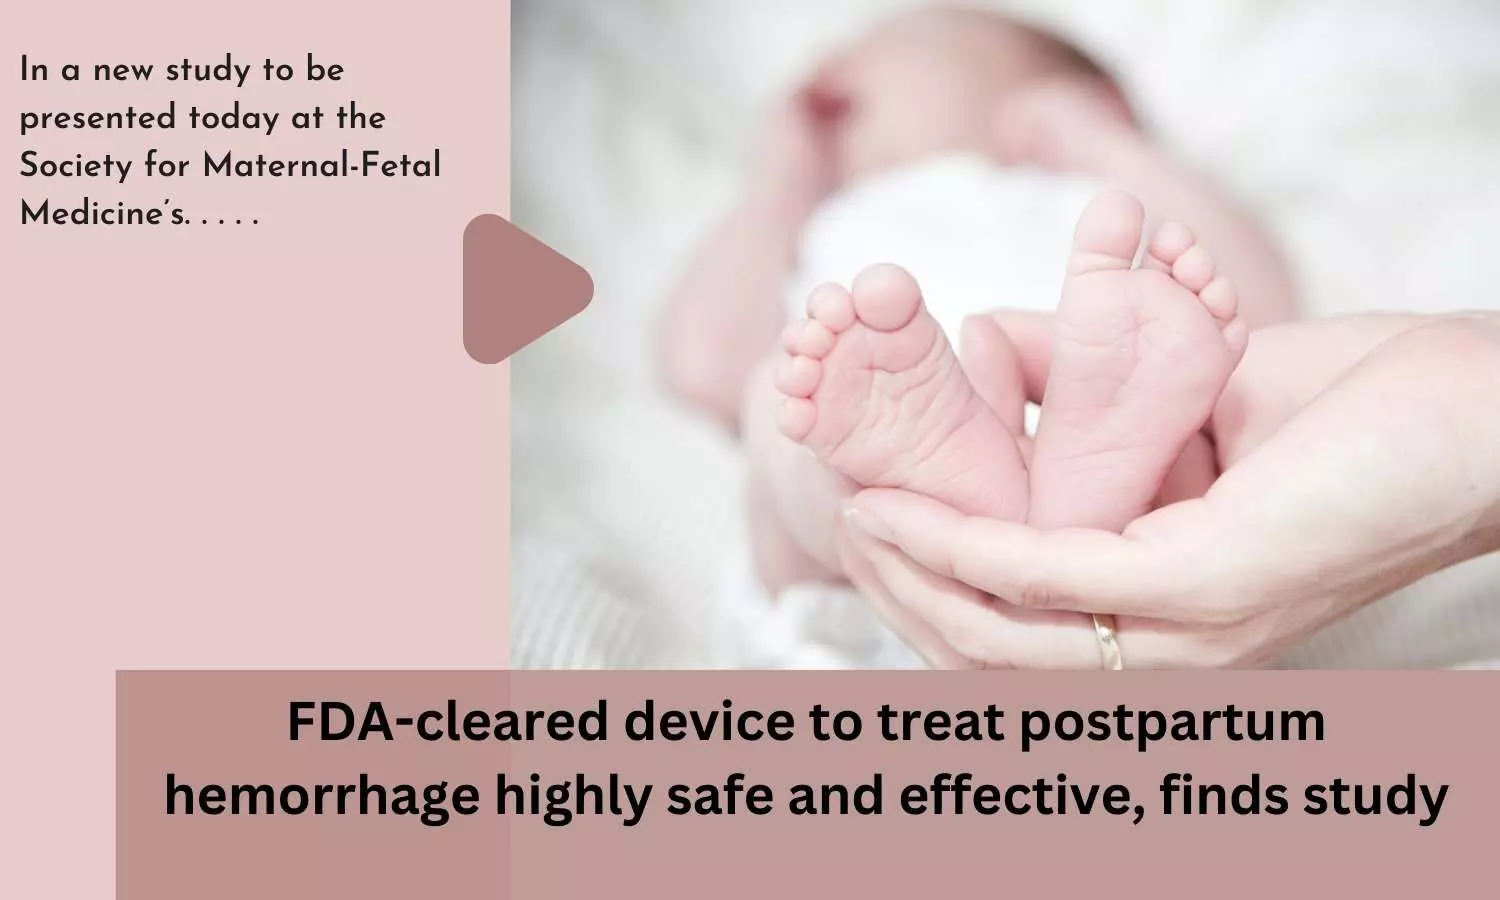 FDA-cleared device to treat postpartum hemorrhage highly safe and effective, finds study